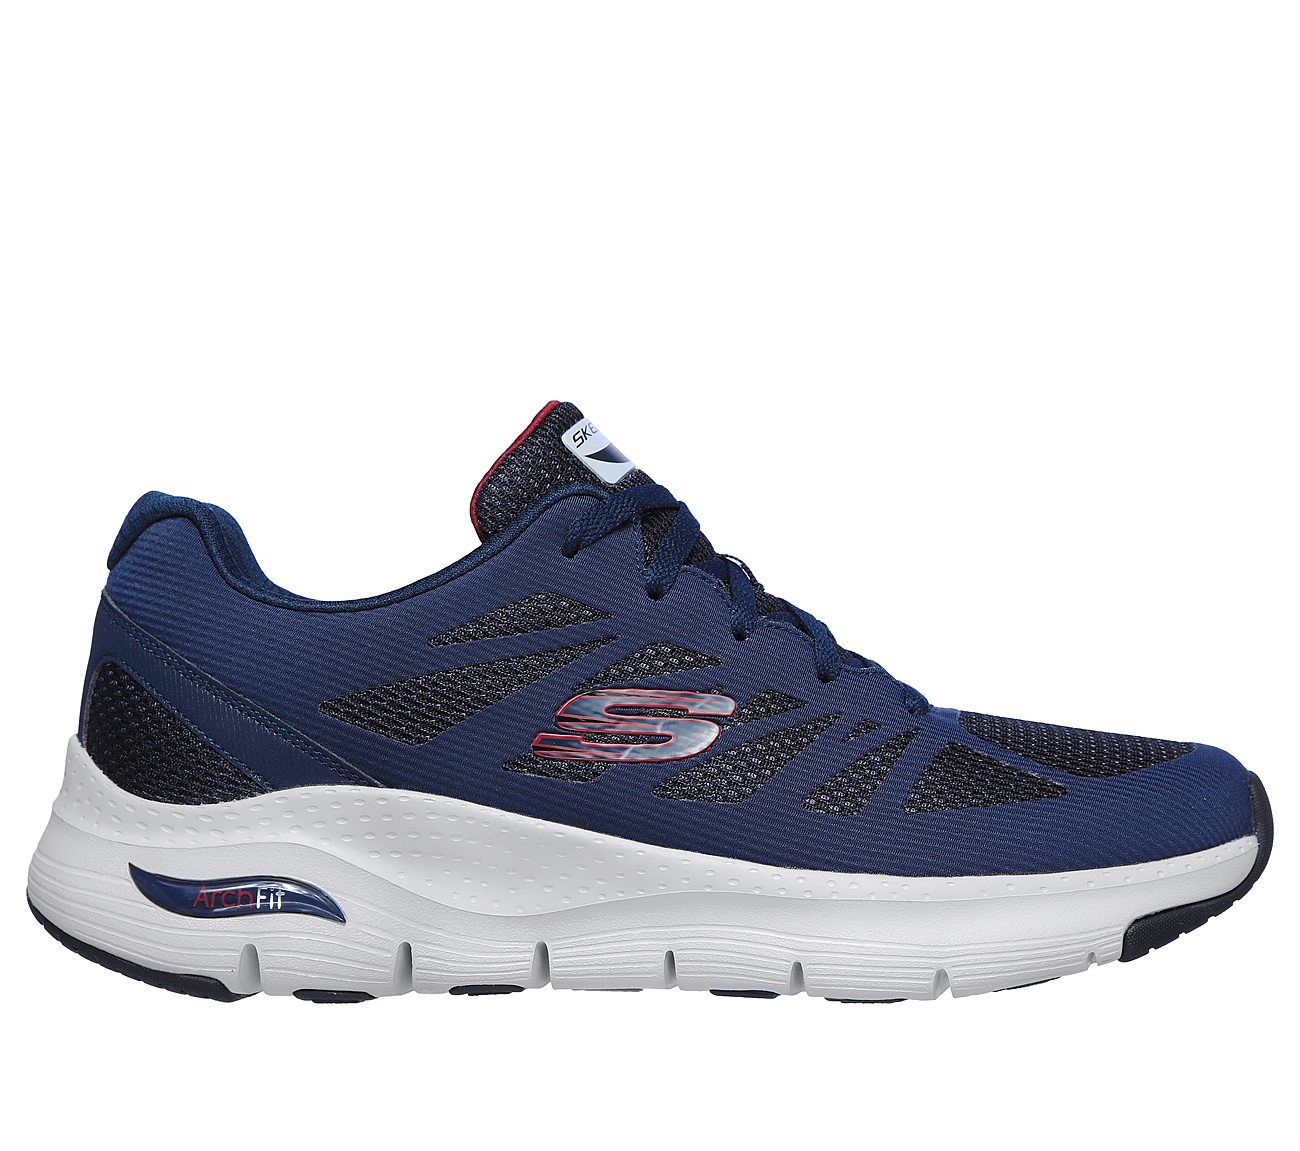 Charge Back Skechers Arch Fit Shoes